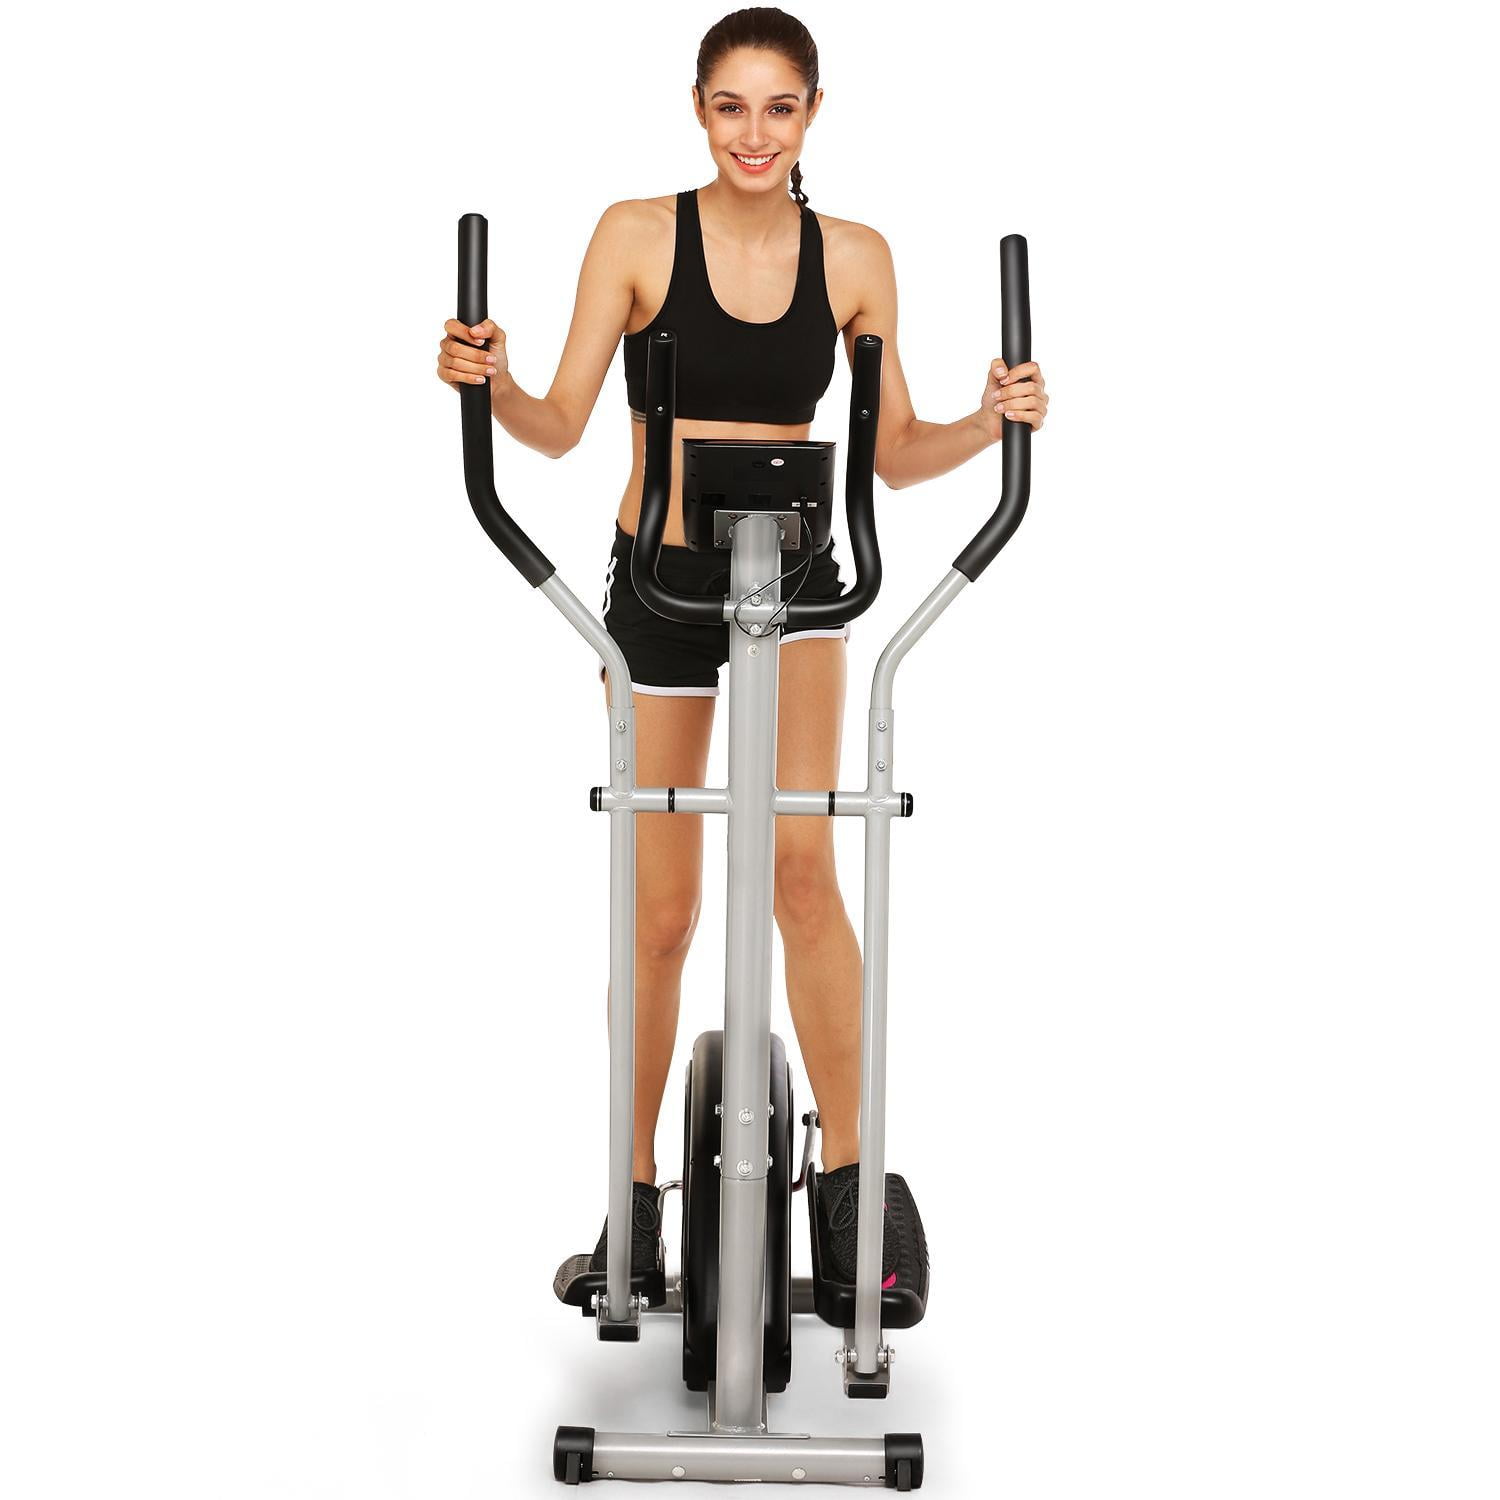 Details about   Ancheer Magnetic Elliptical Machine Exerciser Home Gym Fitness Cardio Mute 2021 